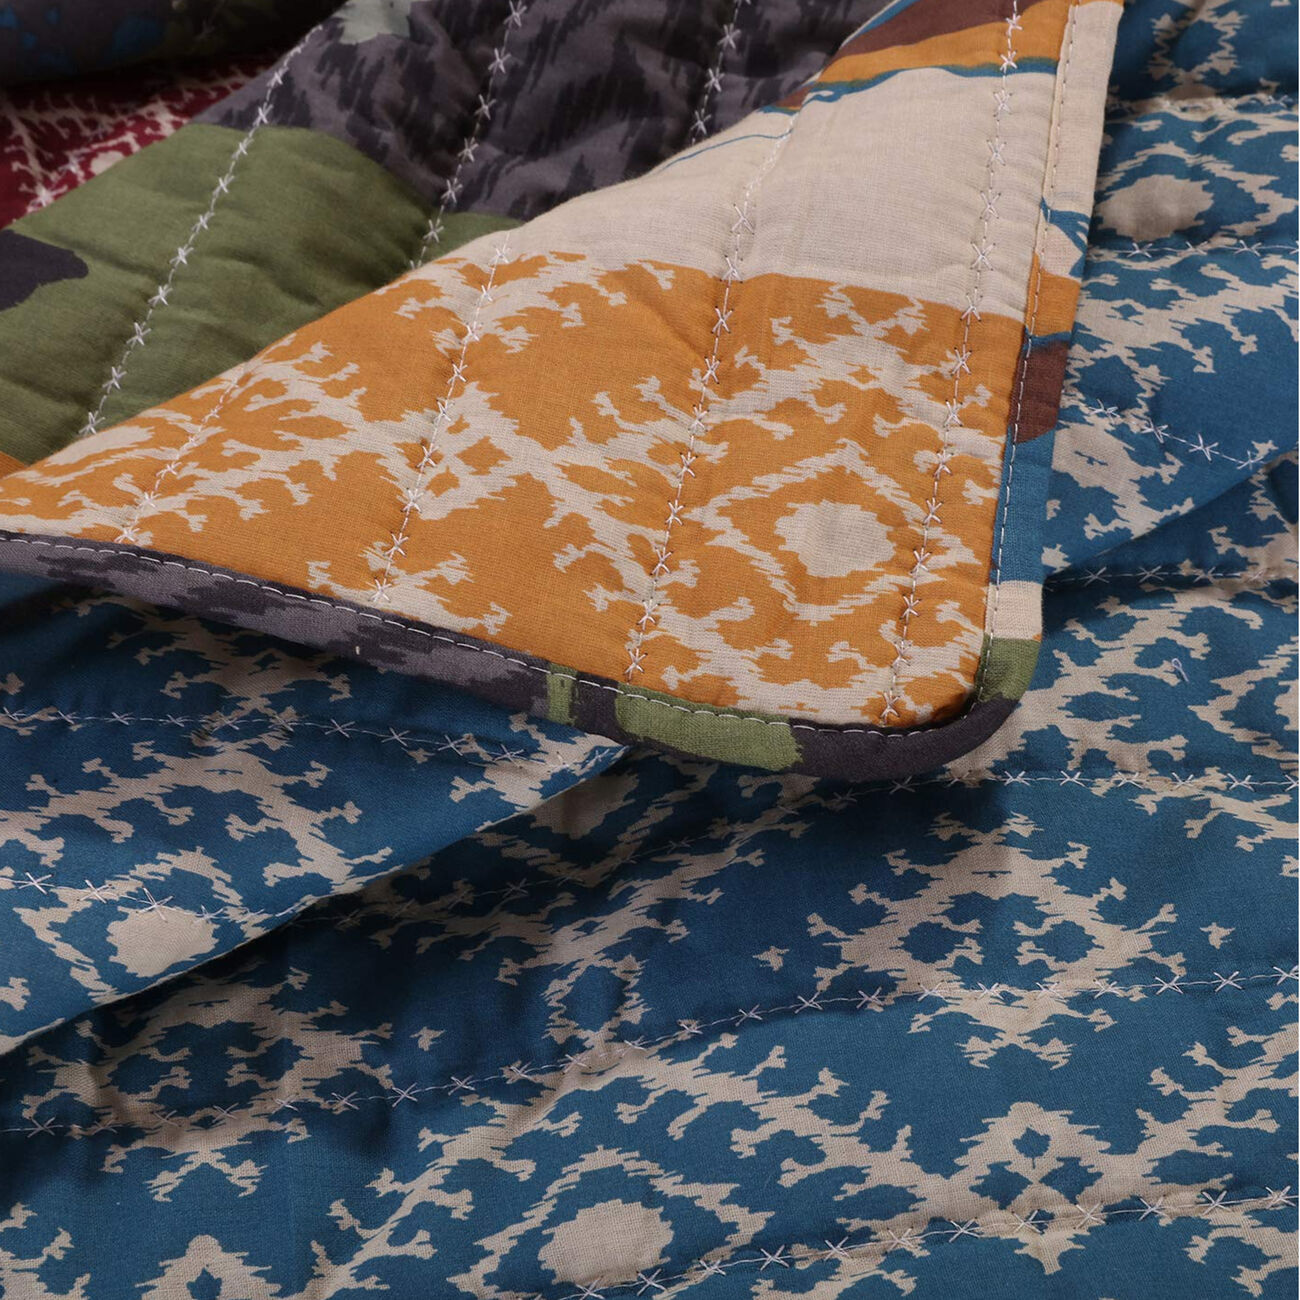 3 Piece King Size Quilt Set with Nature Inspired Print, Multicolor